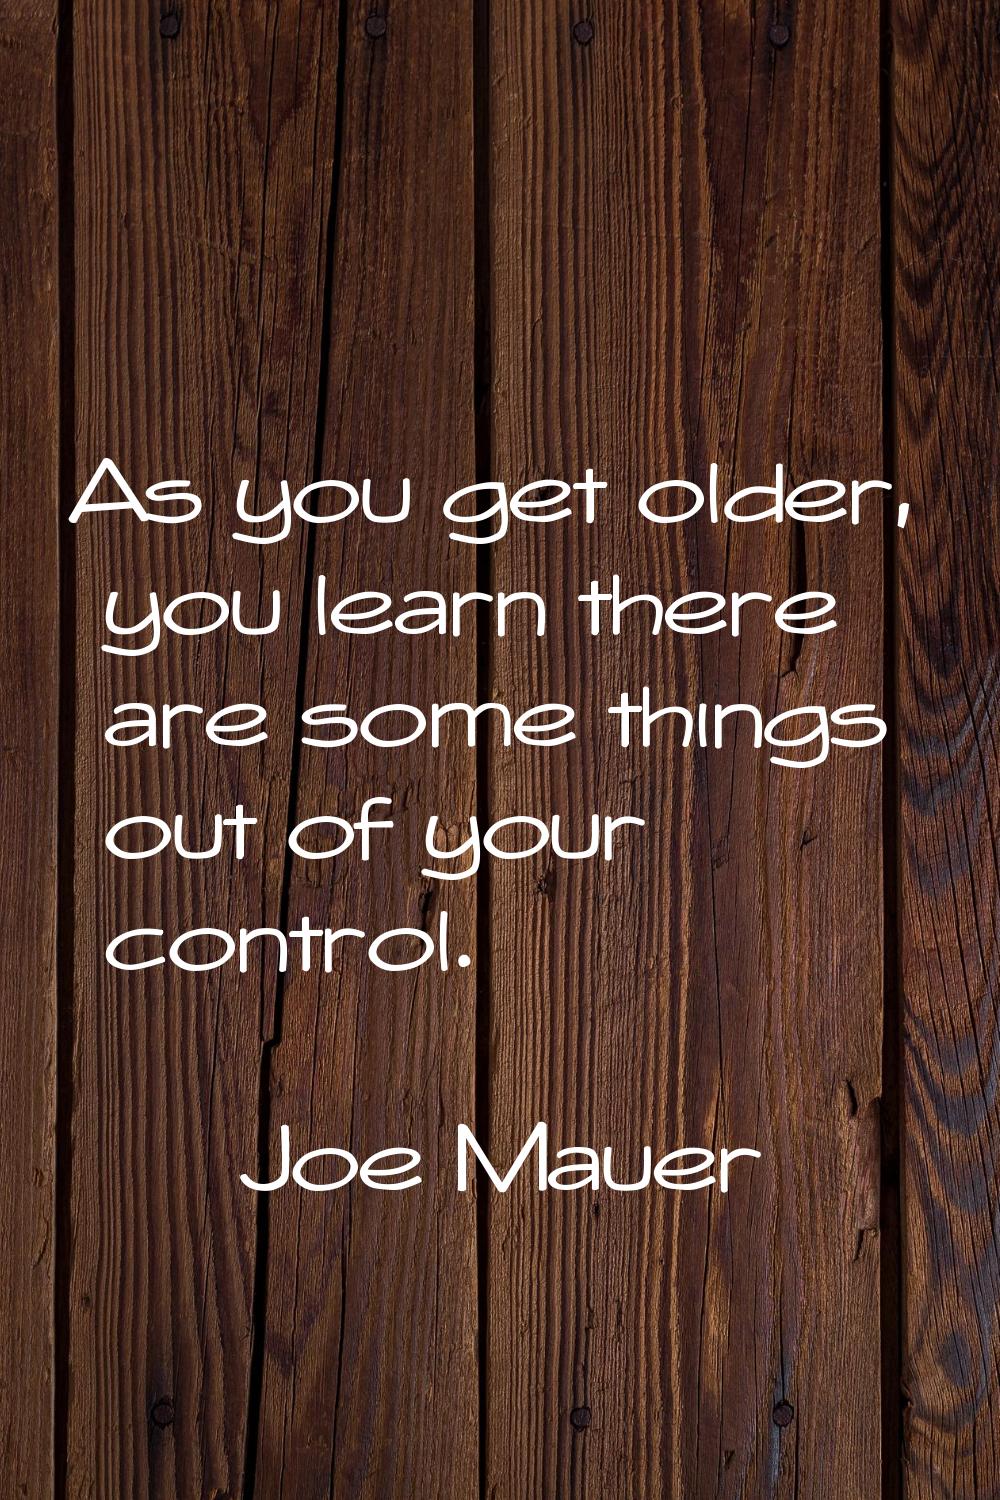 As you get older, you learn there are some things out of your control.